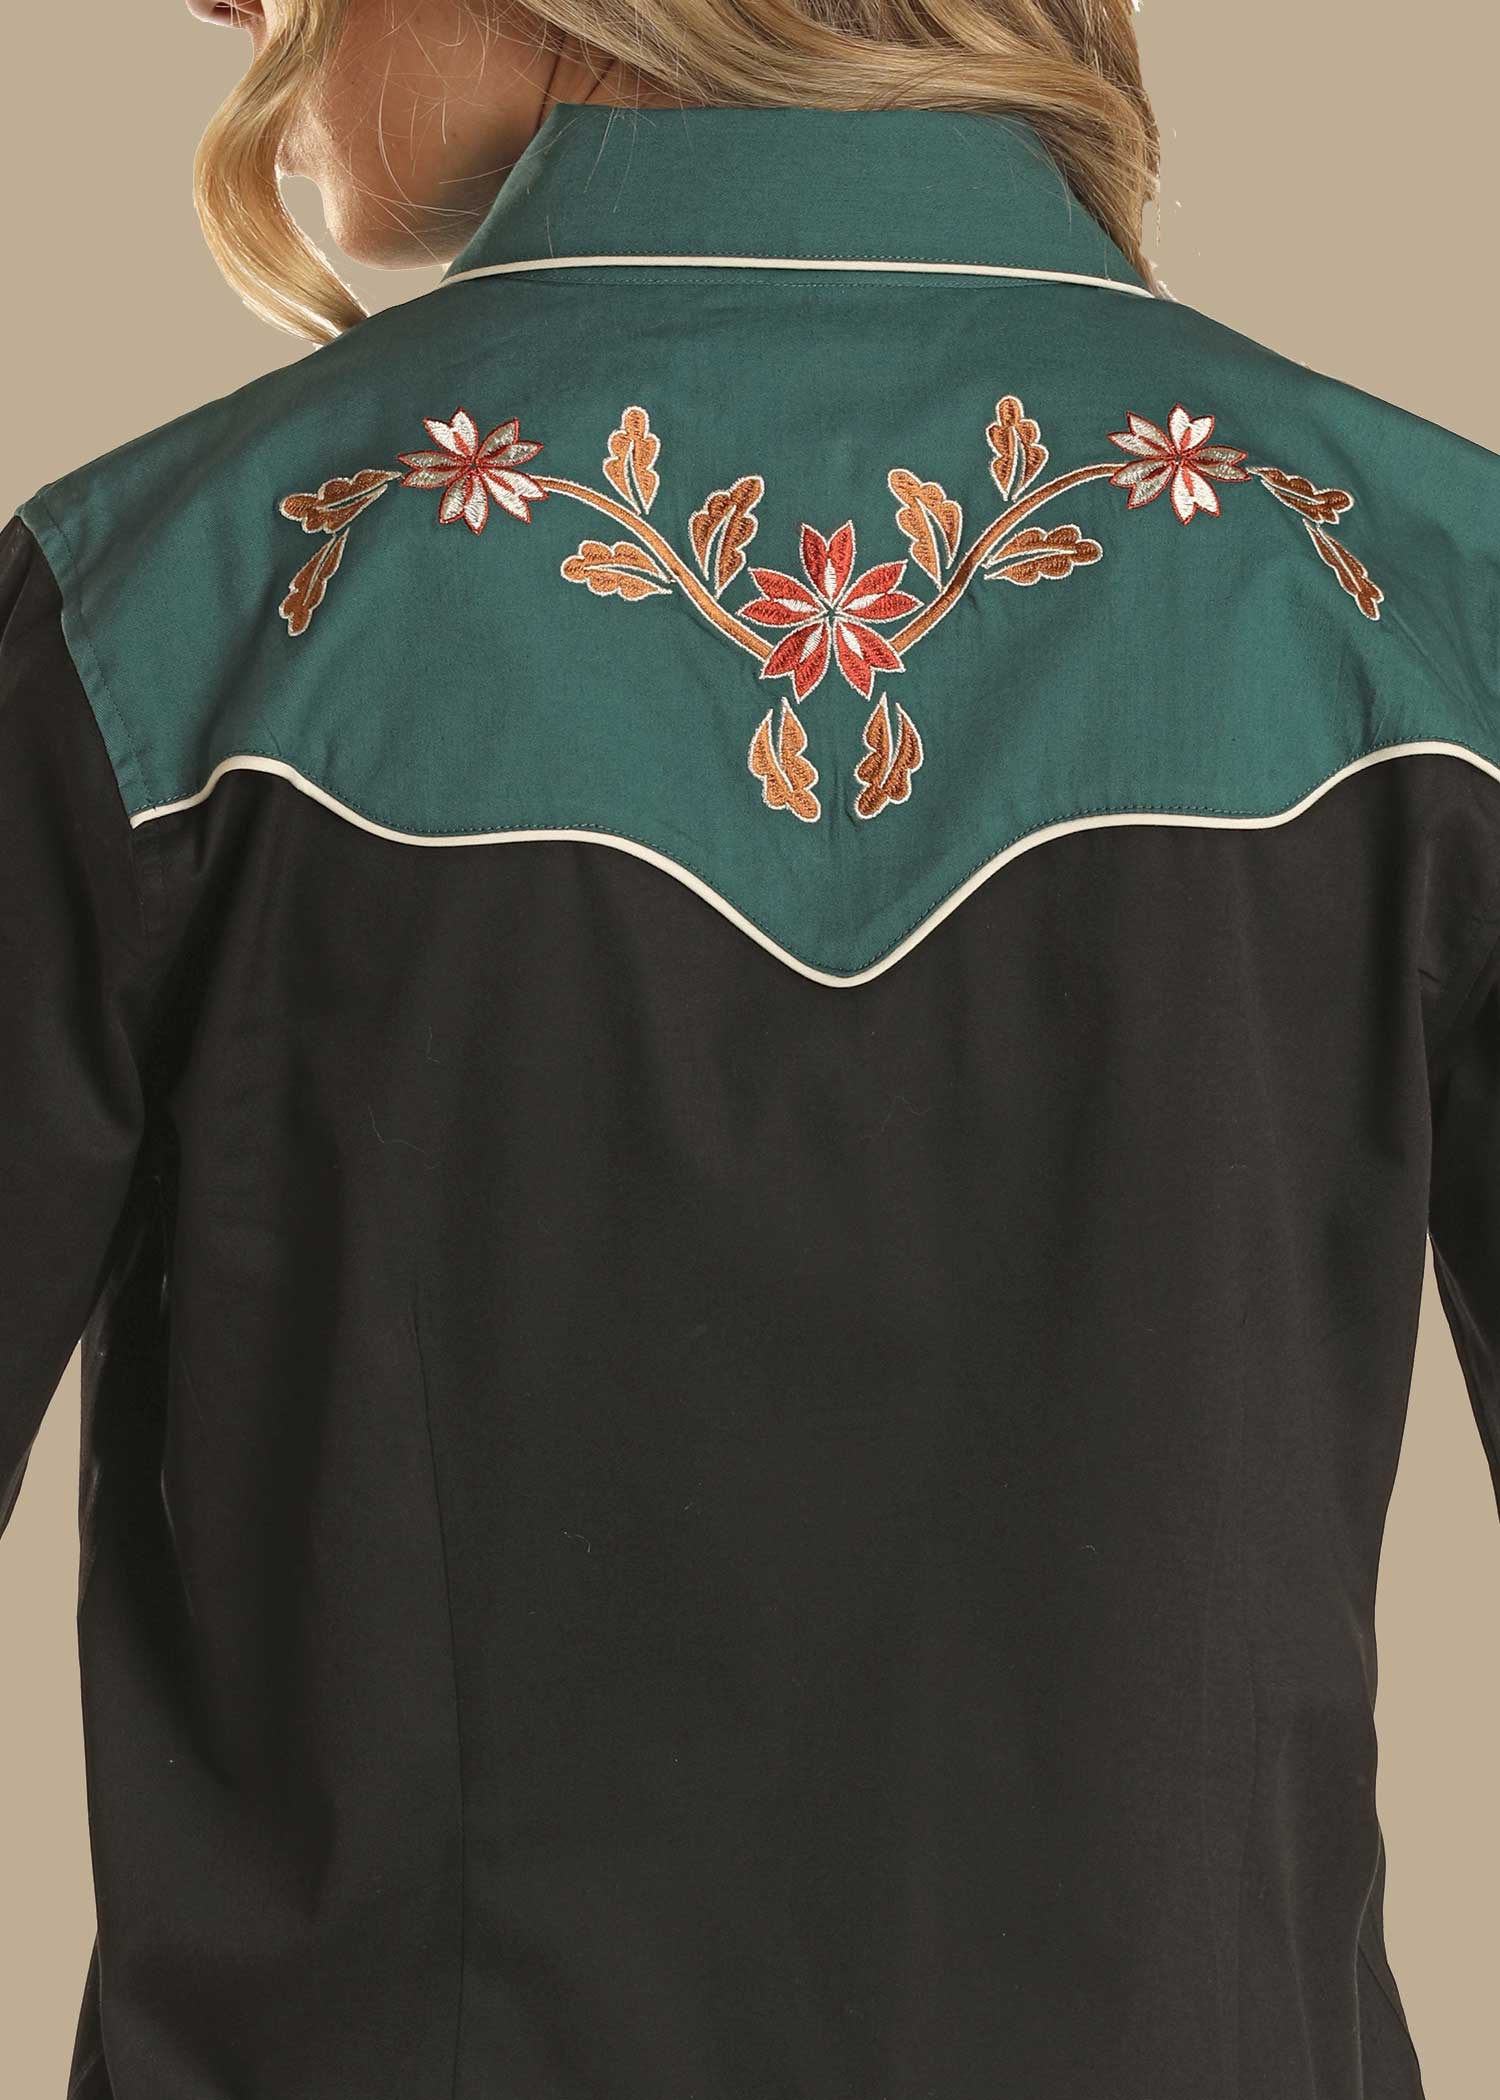 Panhandle Embroidered Retro Snap Shirt